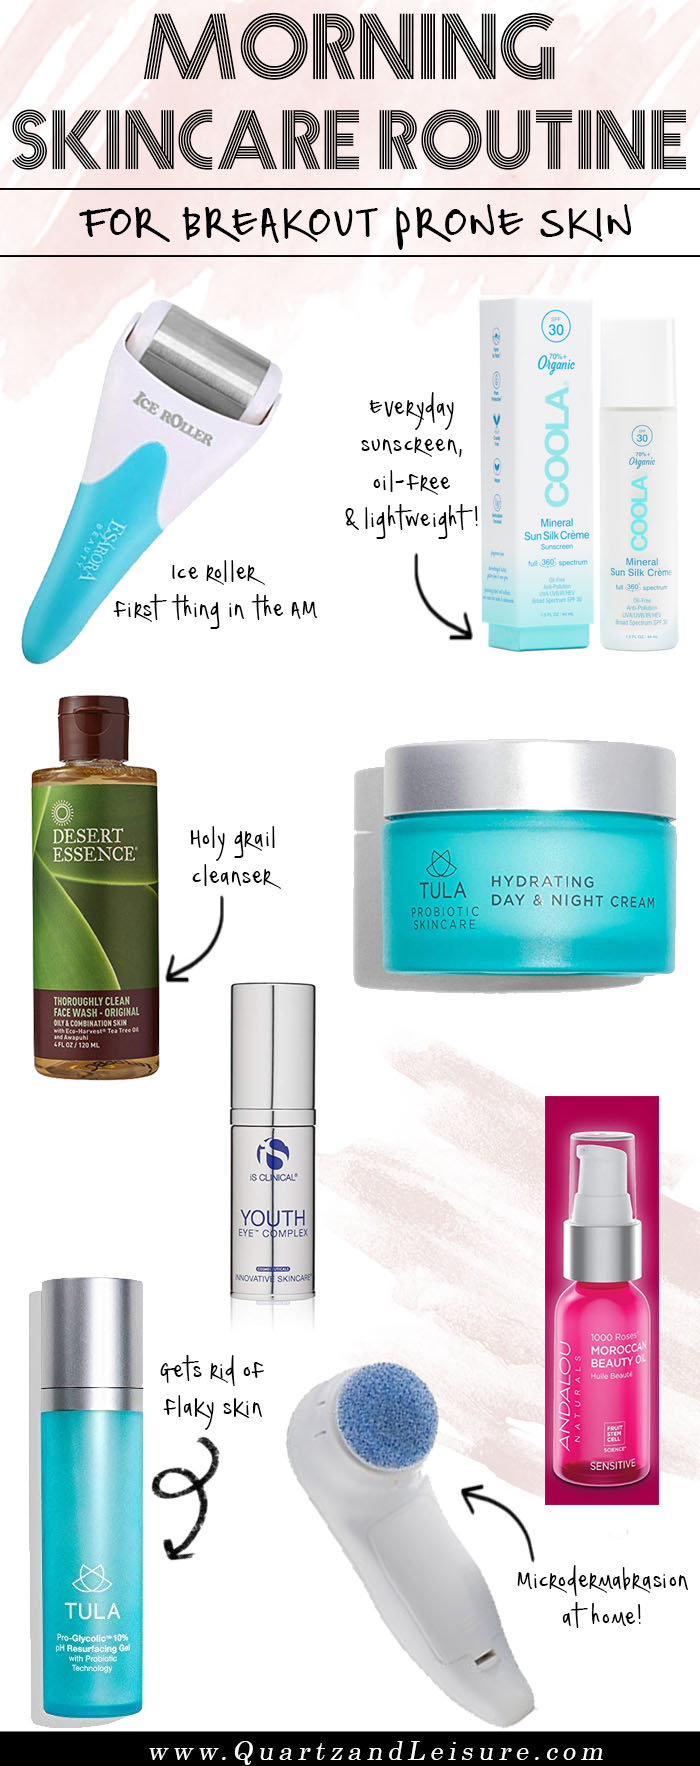 Morning Skincare Routine for Breakout Prone Skin